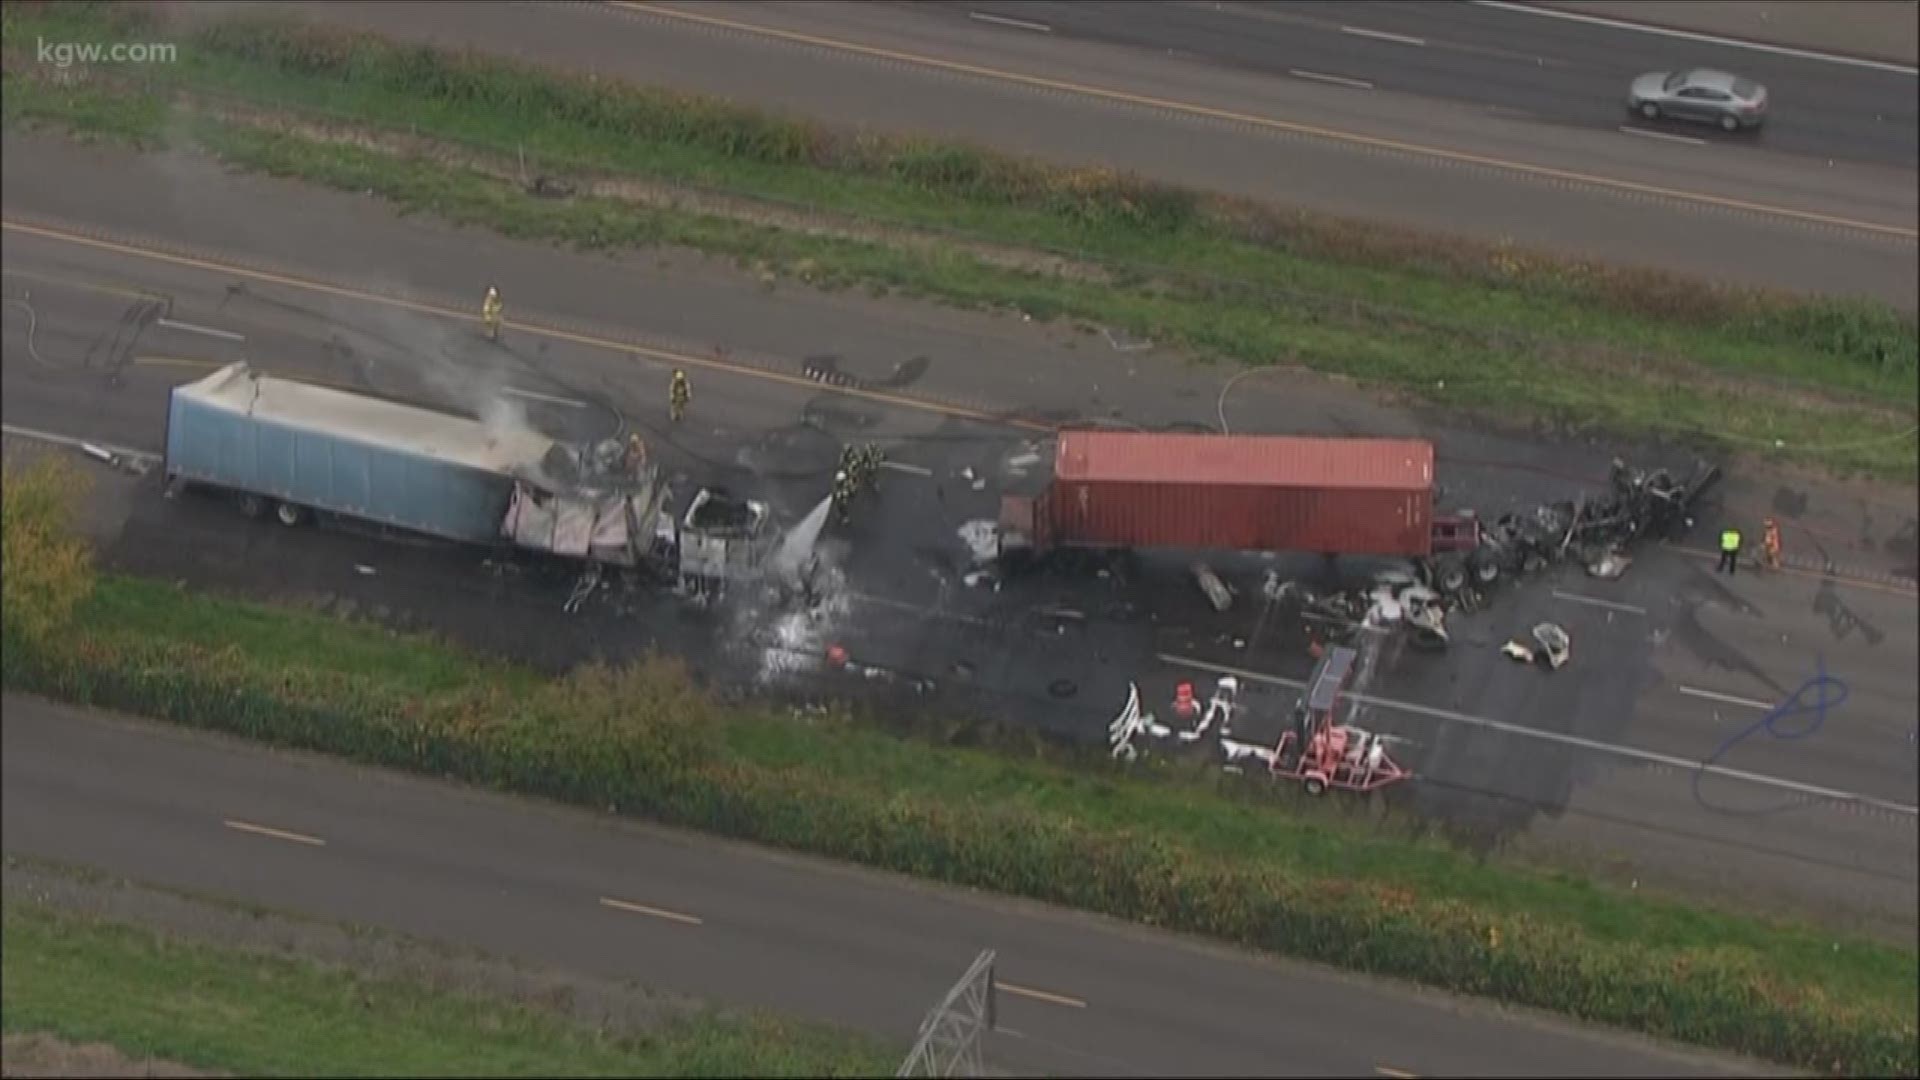 Two semi-trucks crashed near Woodburn and were consumed by flames.